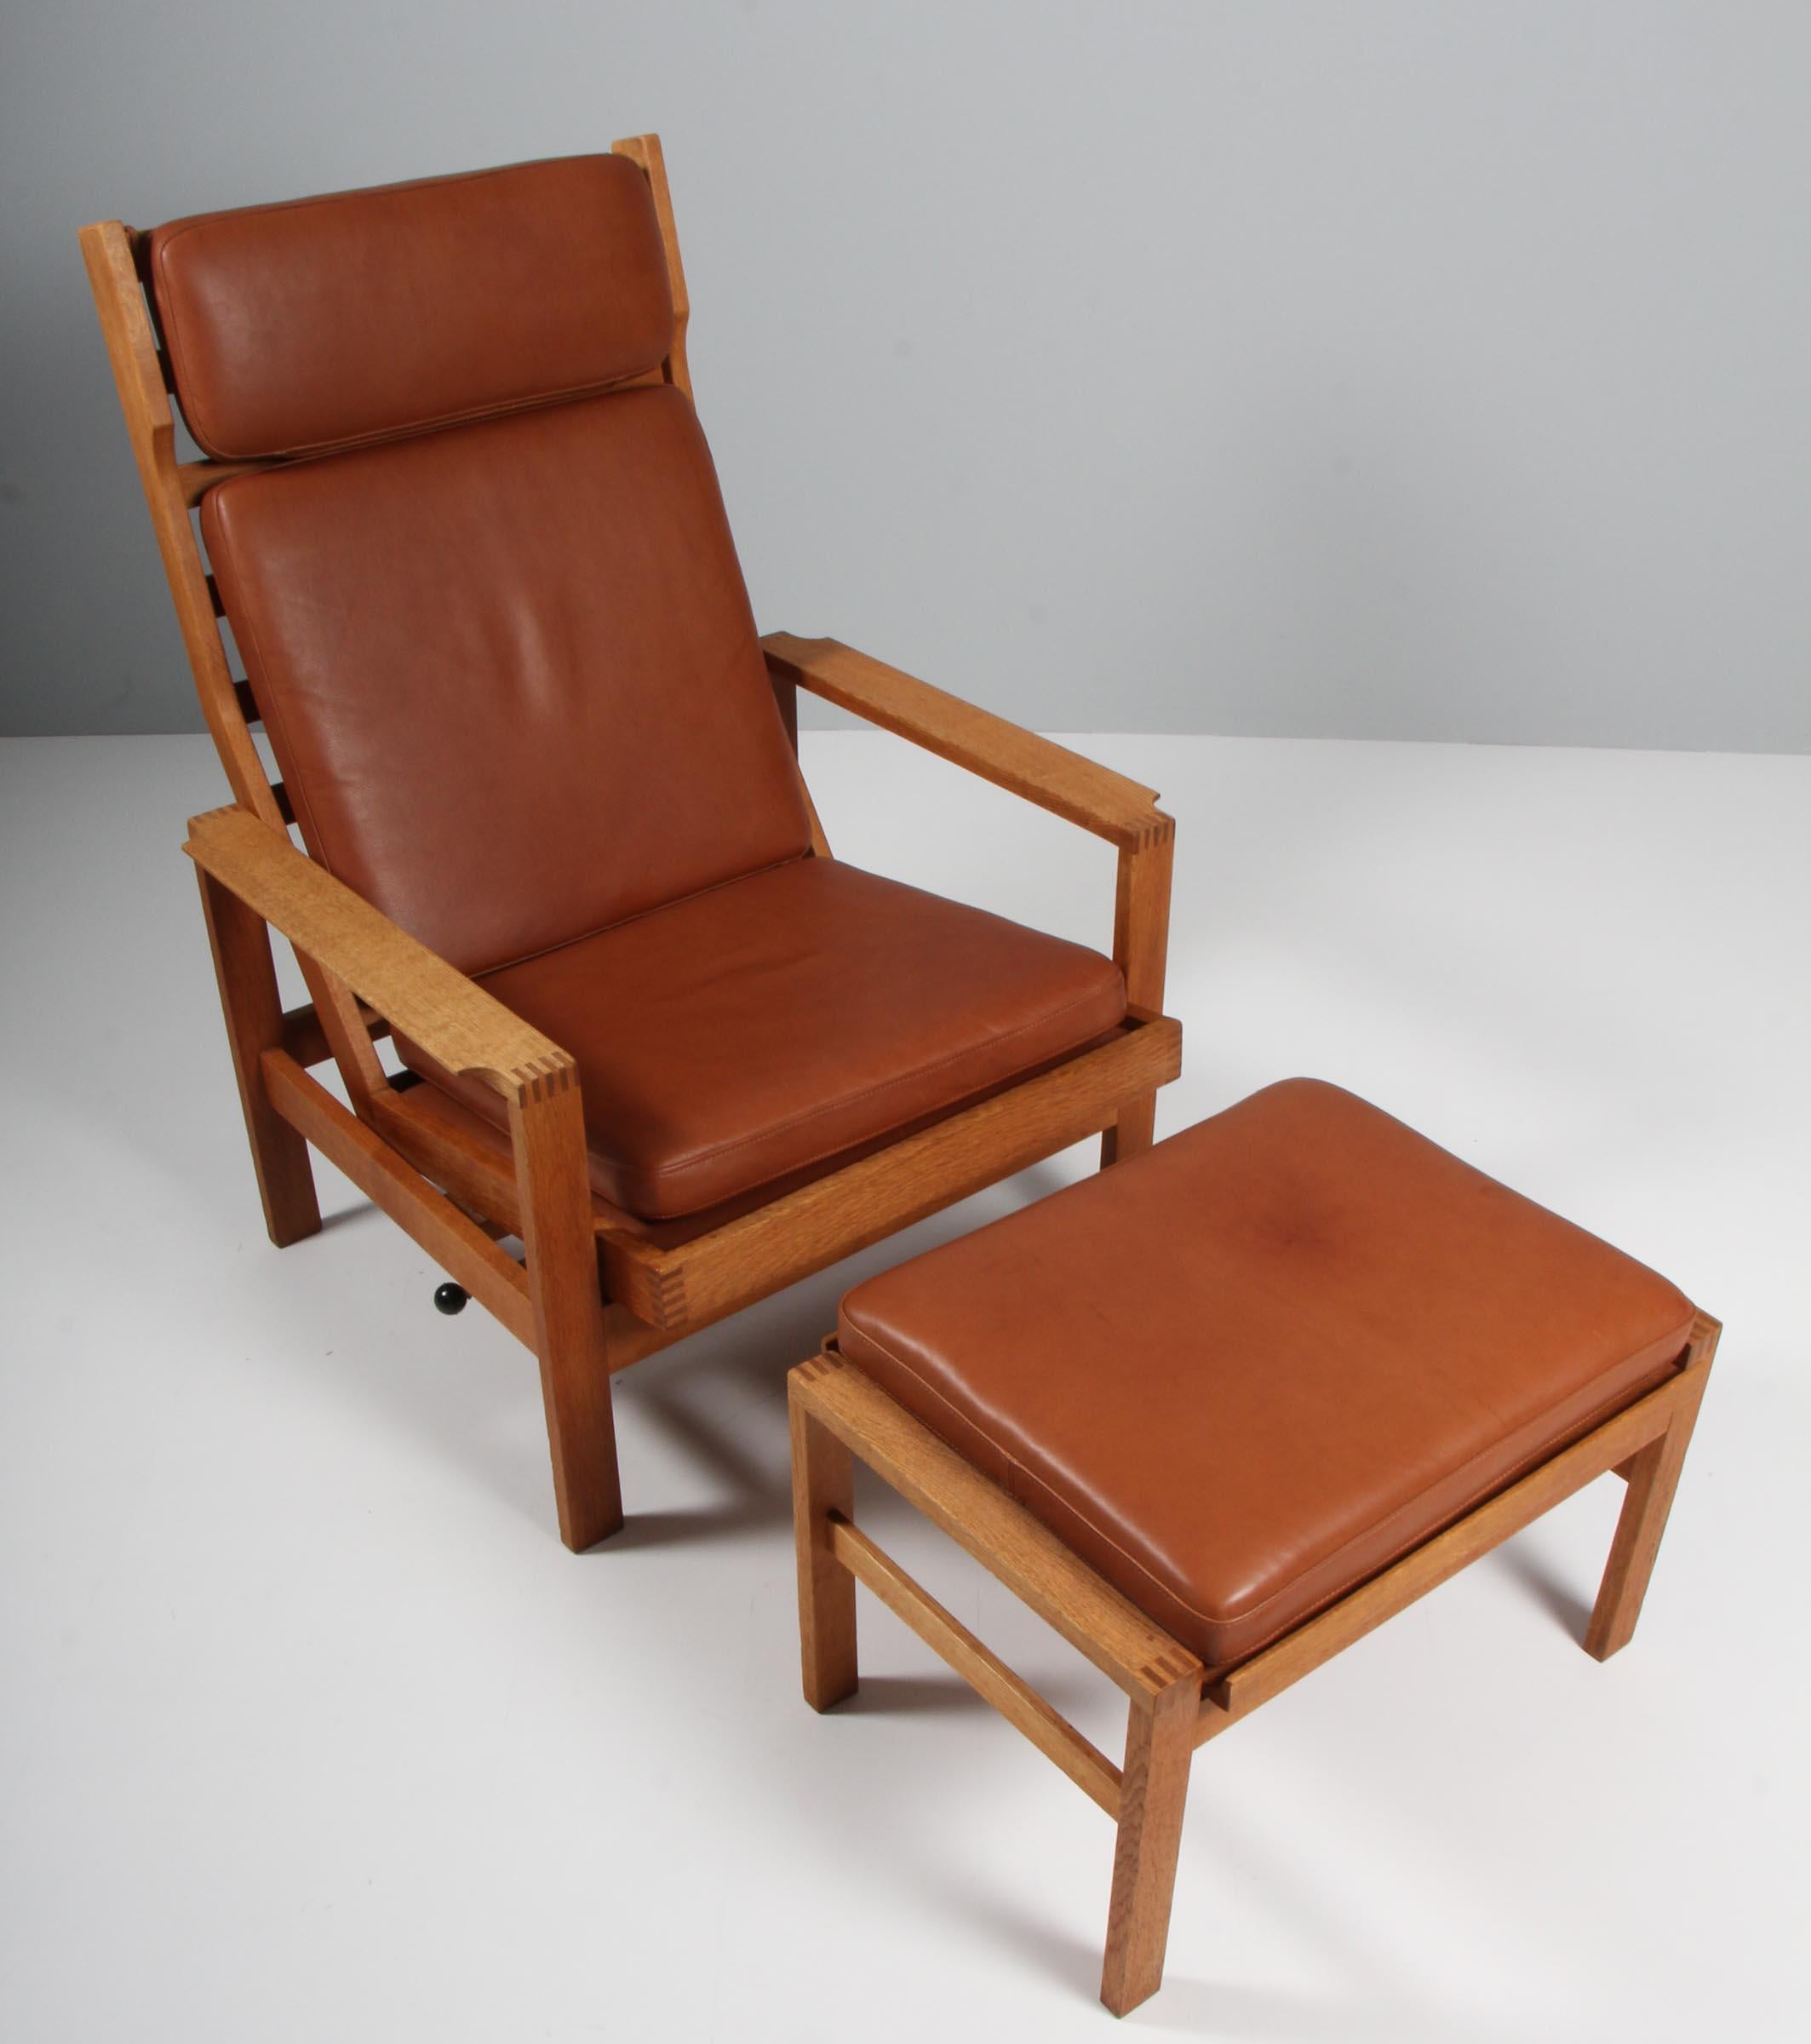 Madsen & Schubell lounge chair with ottoman. Upholstered with red wool.

Frame of teak.

Made by Madsen & Schubell.